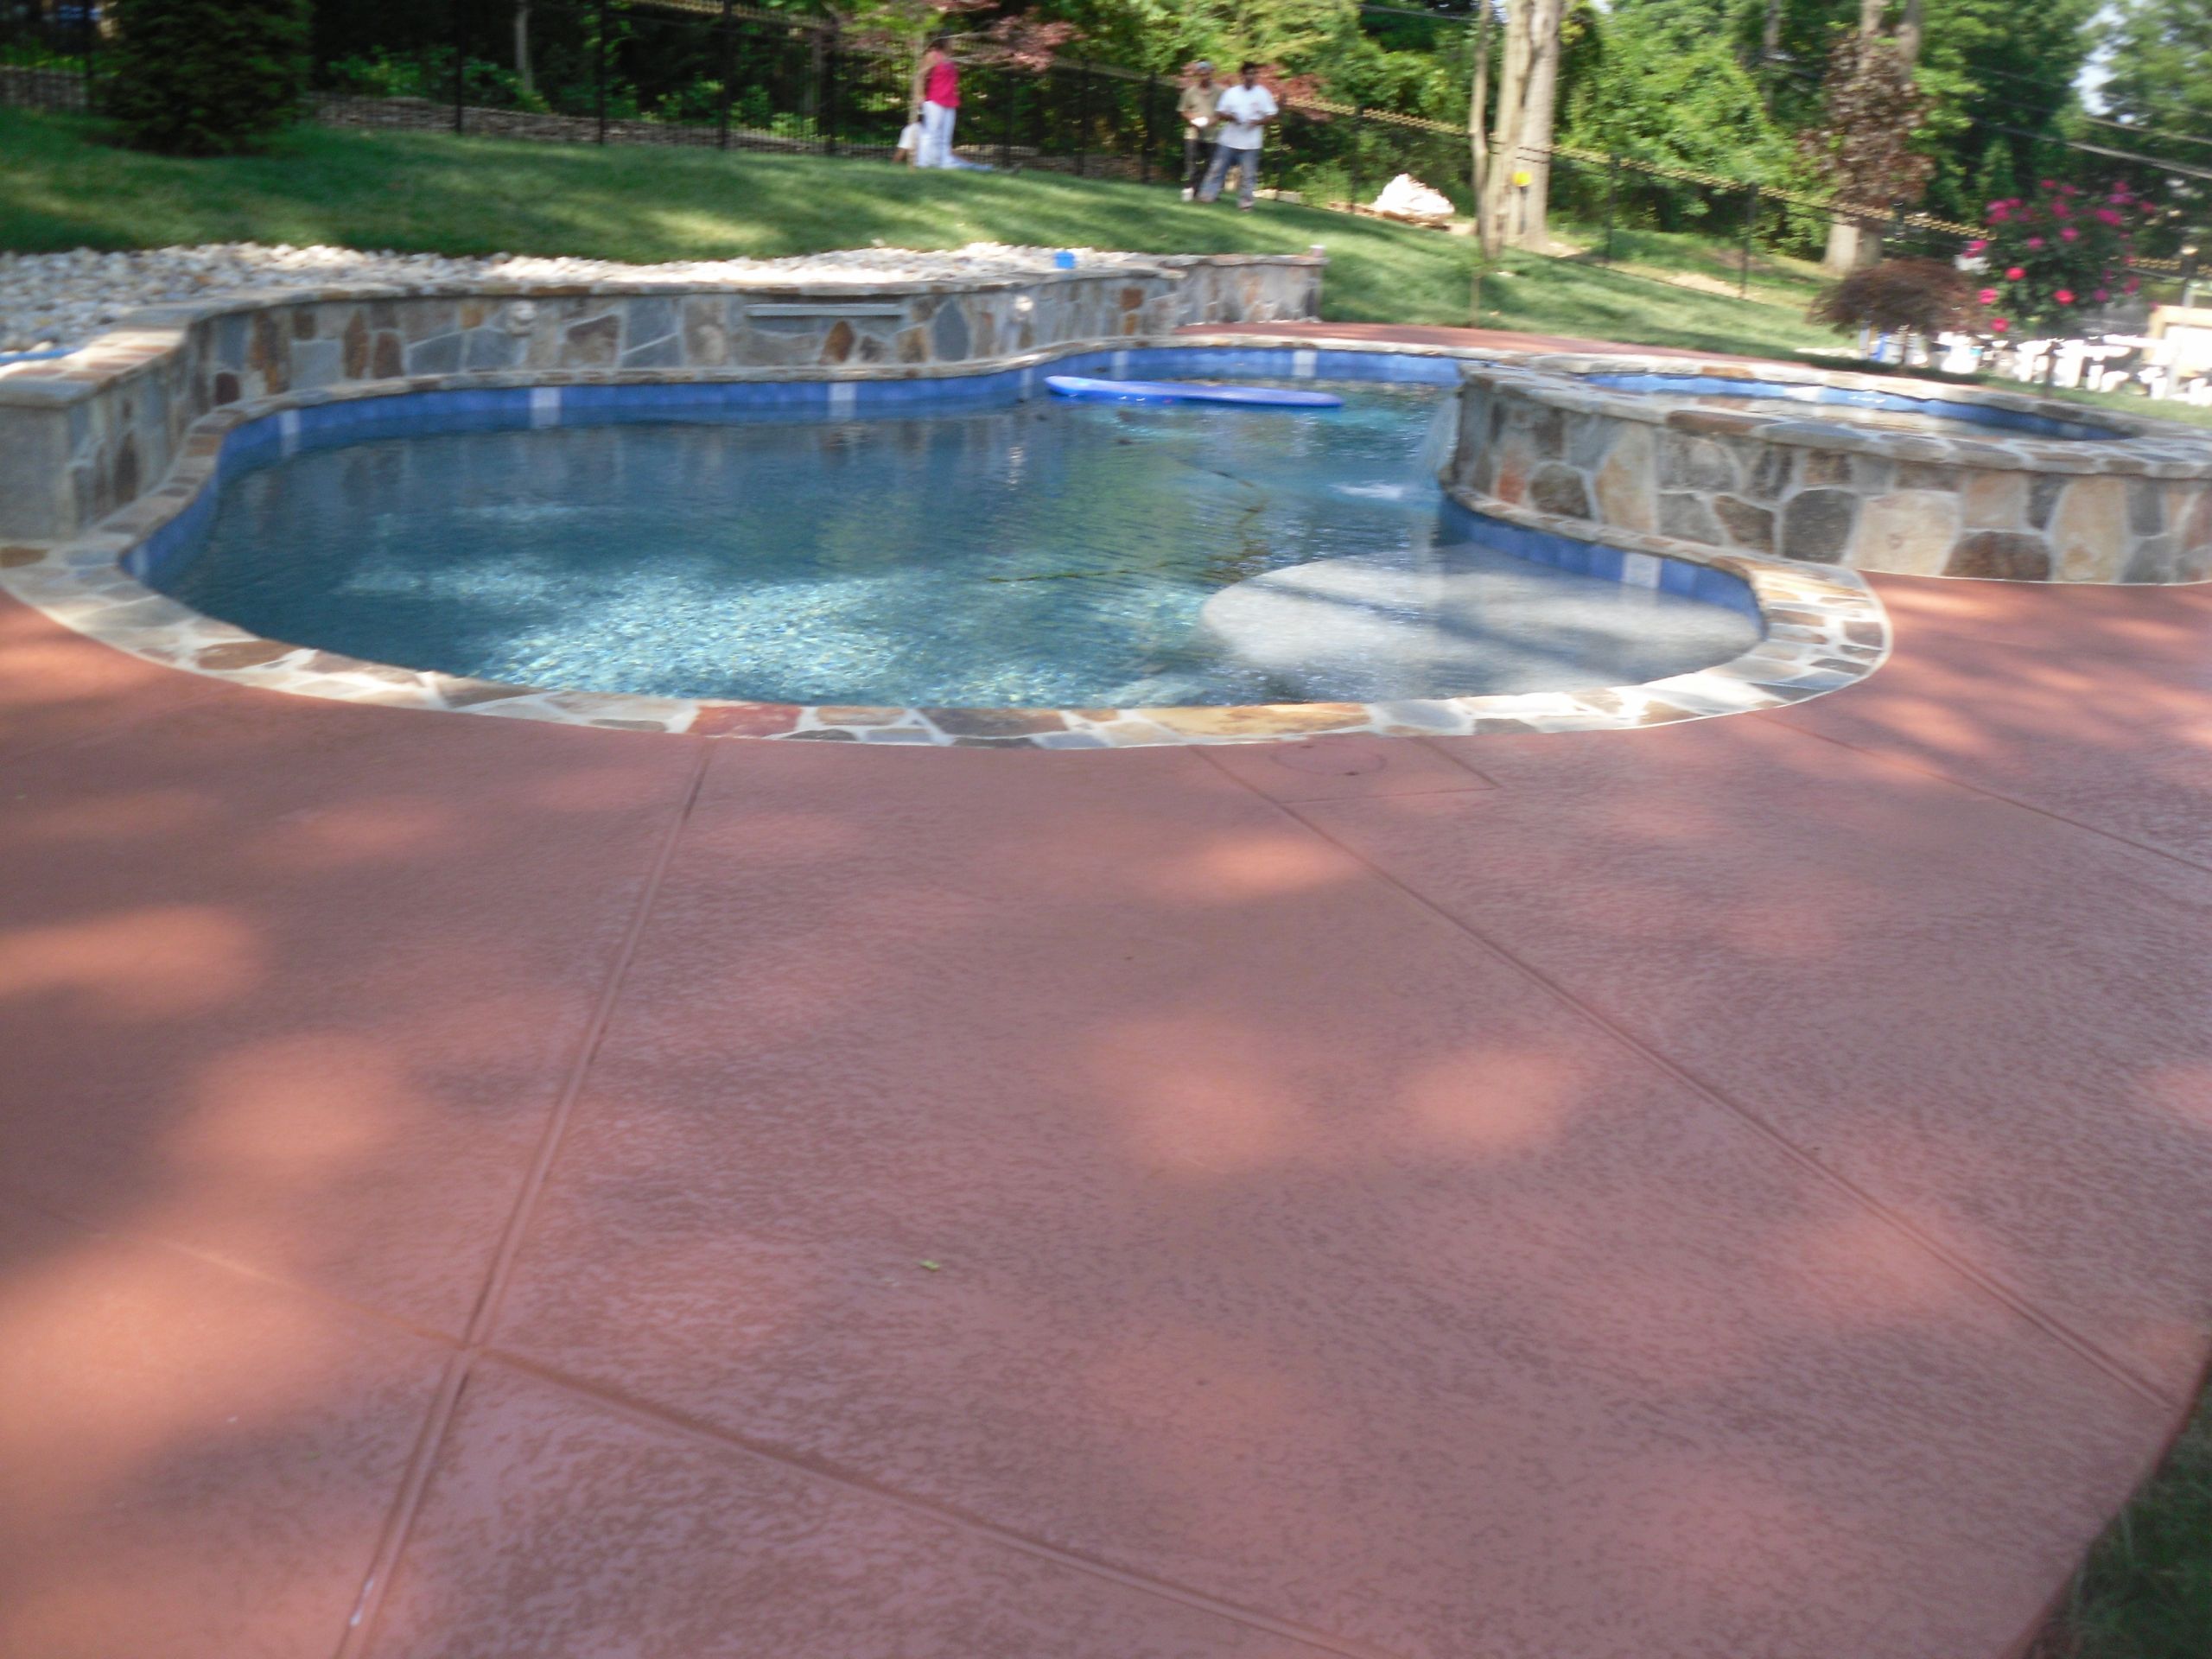 Painting Pool Deck
 Pros and Cons of Painting a Concrete Pool Deck